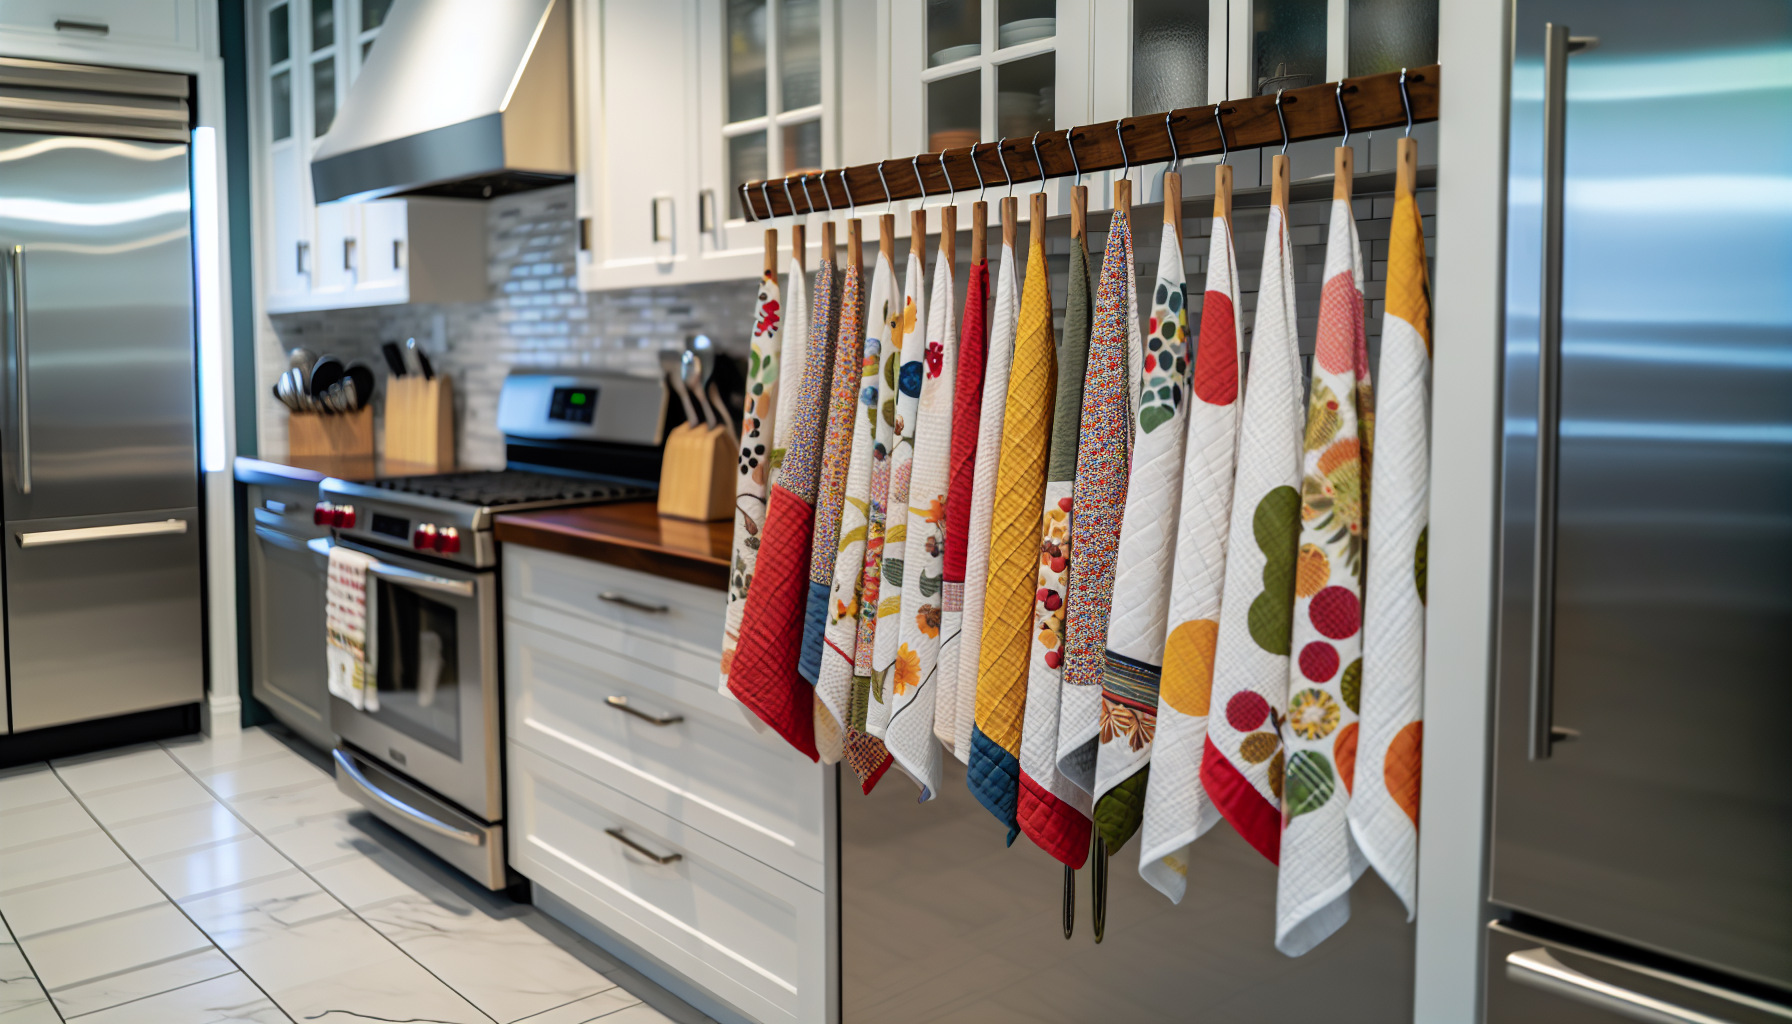 Creative and colorful dish towel designs hanging in a kitchen